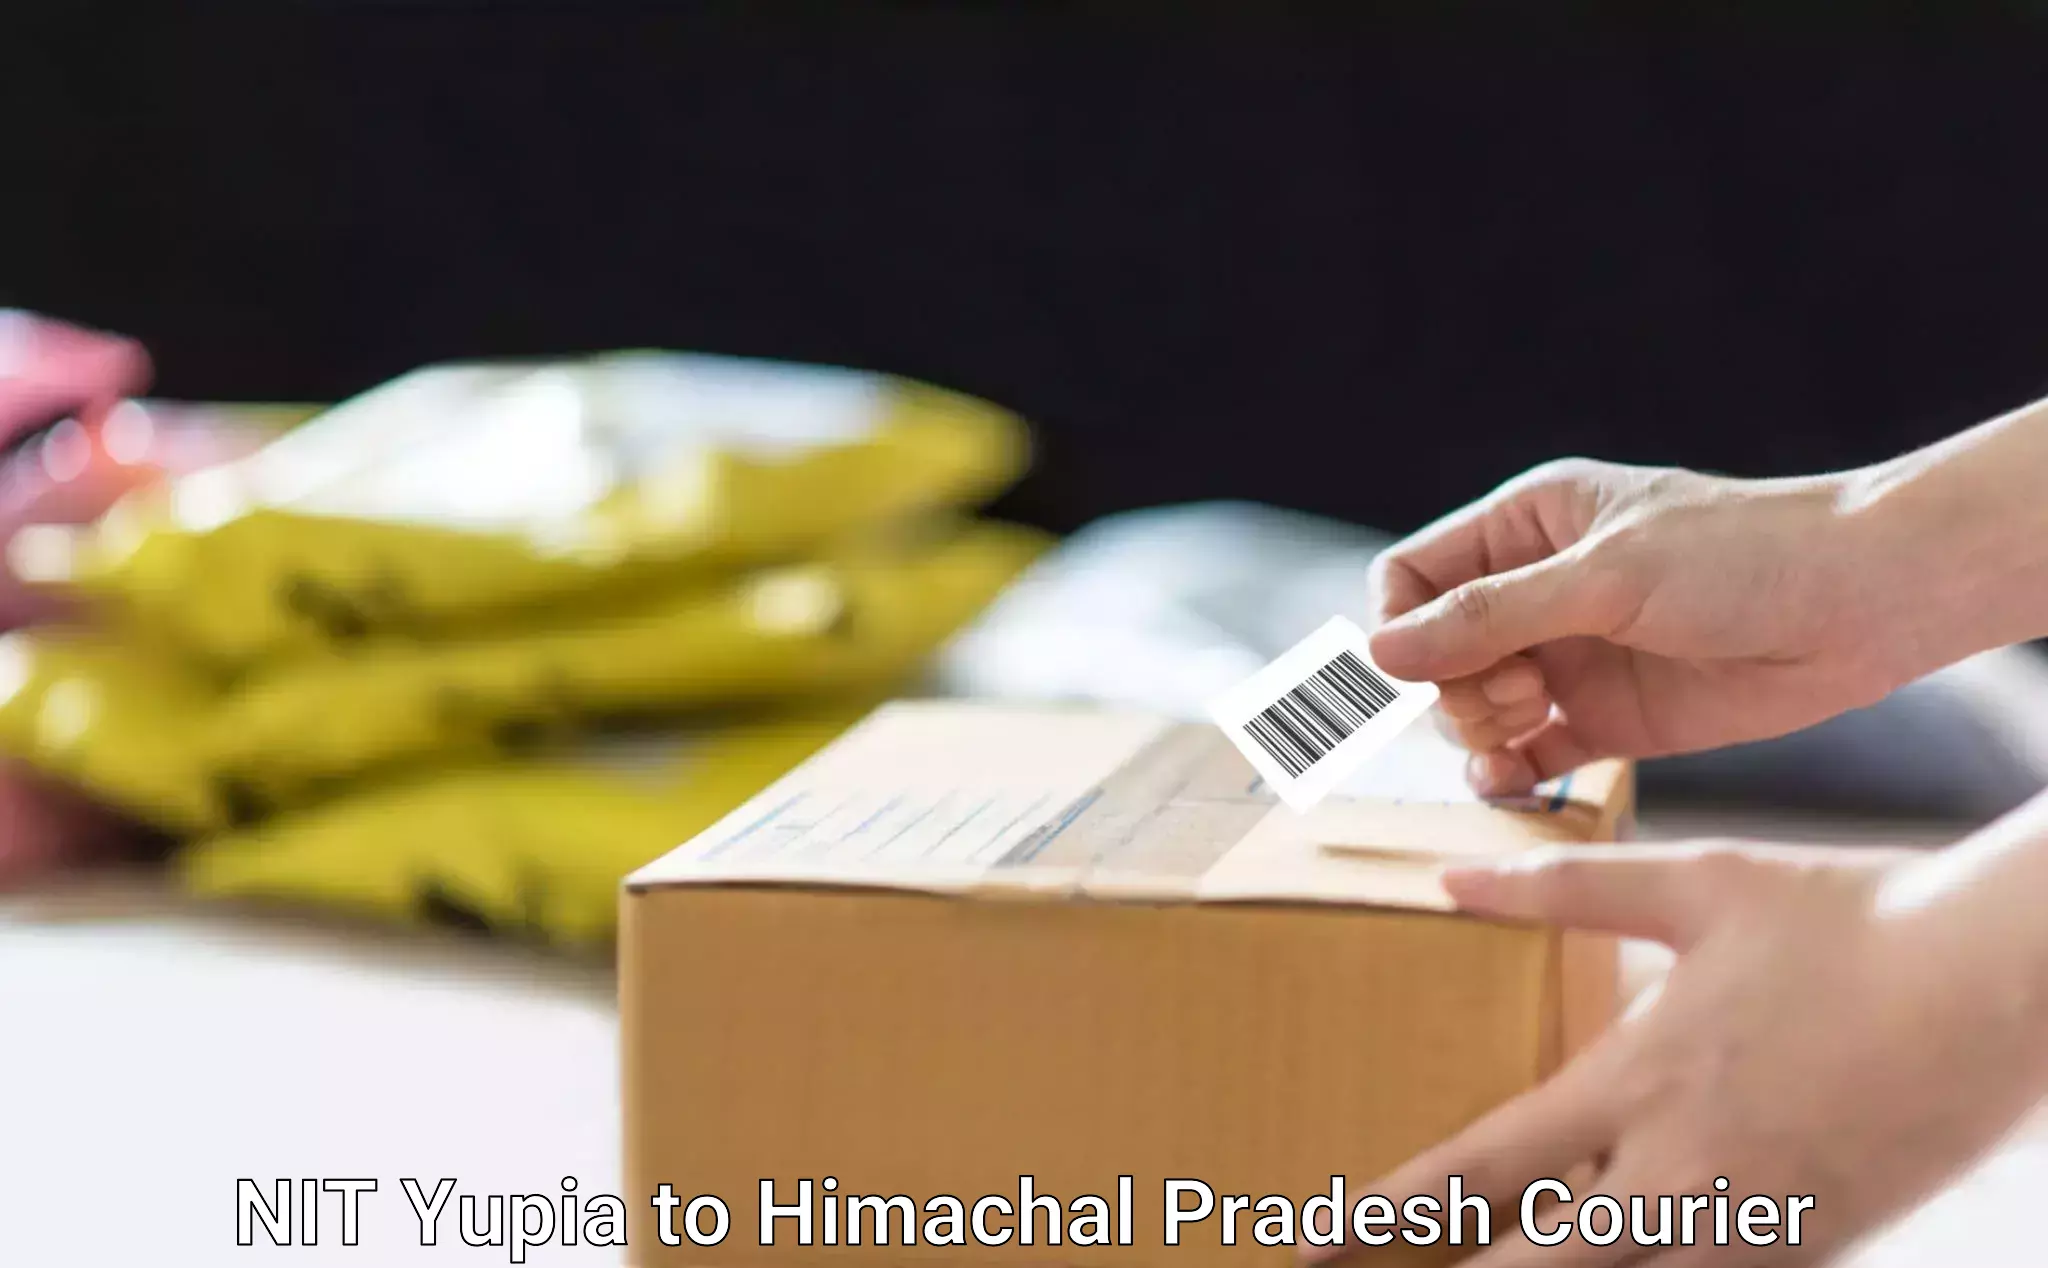 Special handling courier NIT Yupia to Himachal Pradesh